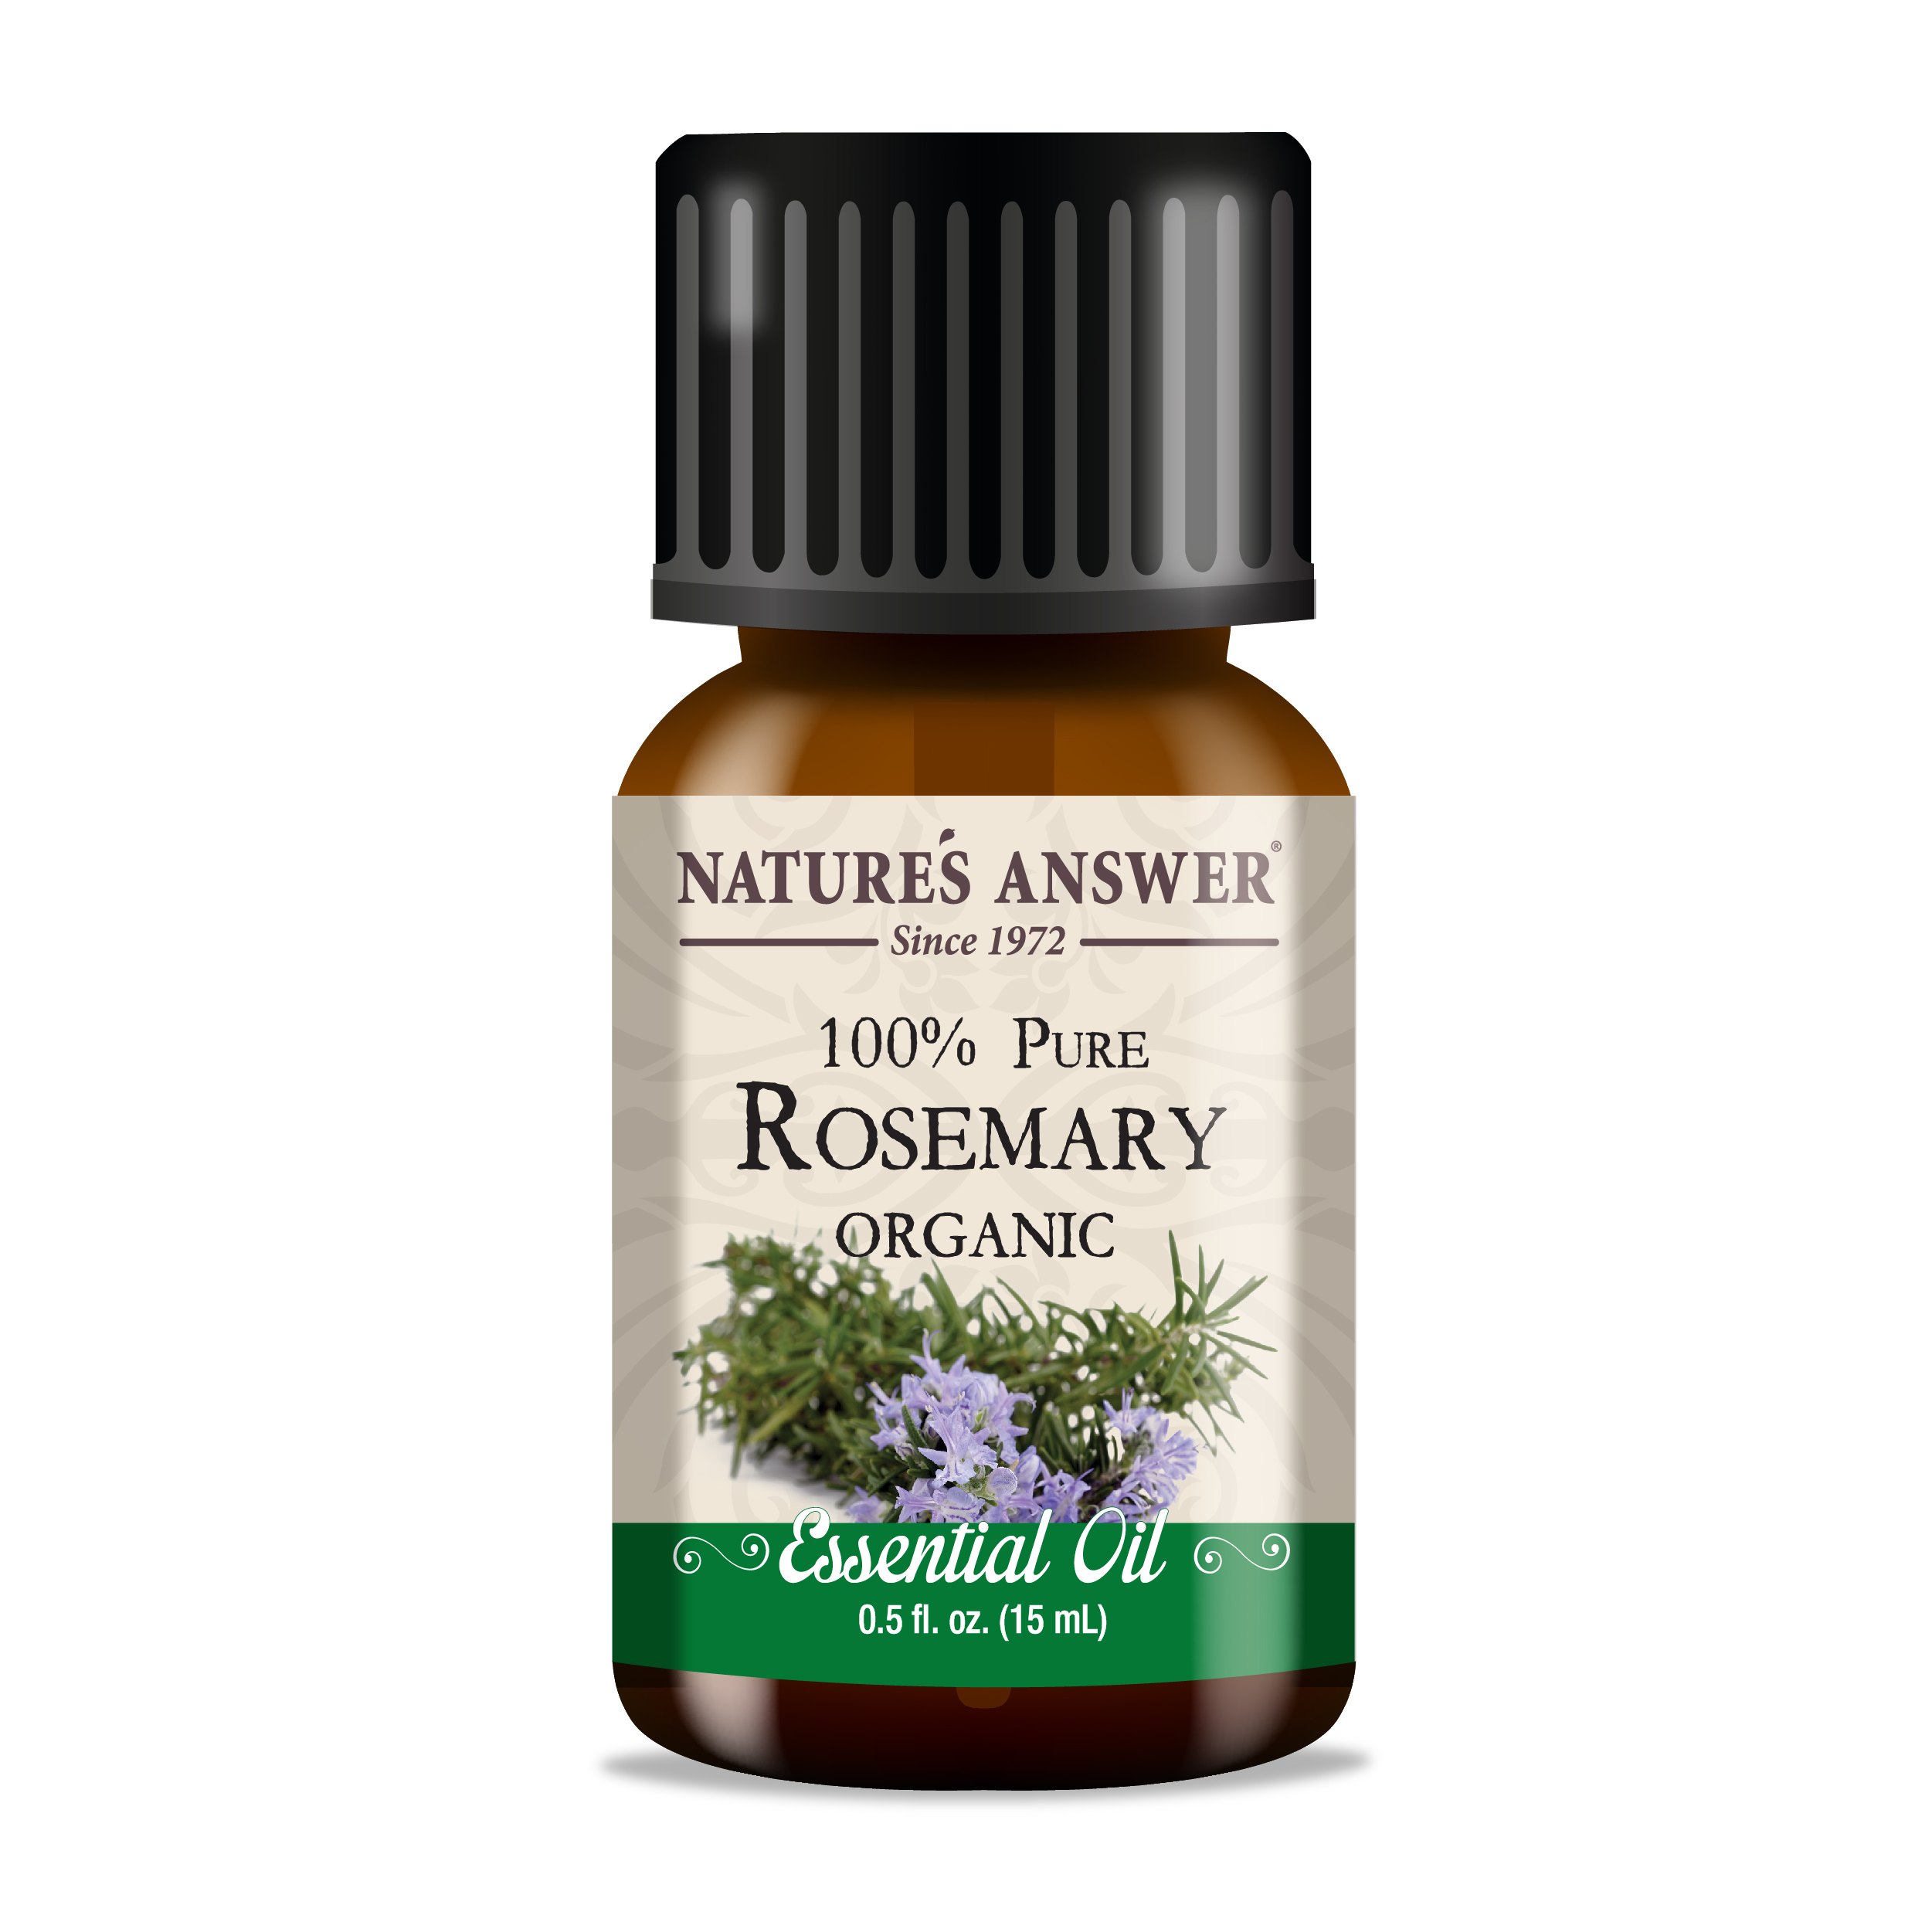 Nature's Answer Essential Oil, Organic, 100% Pure, Rosemary - 0.5 fl oz